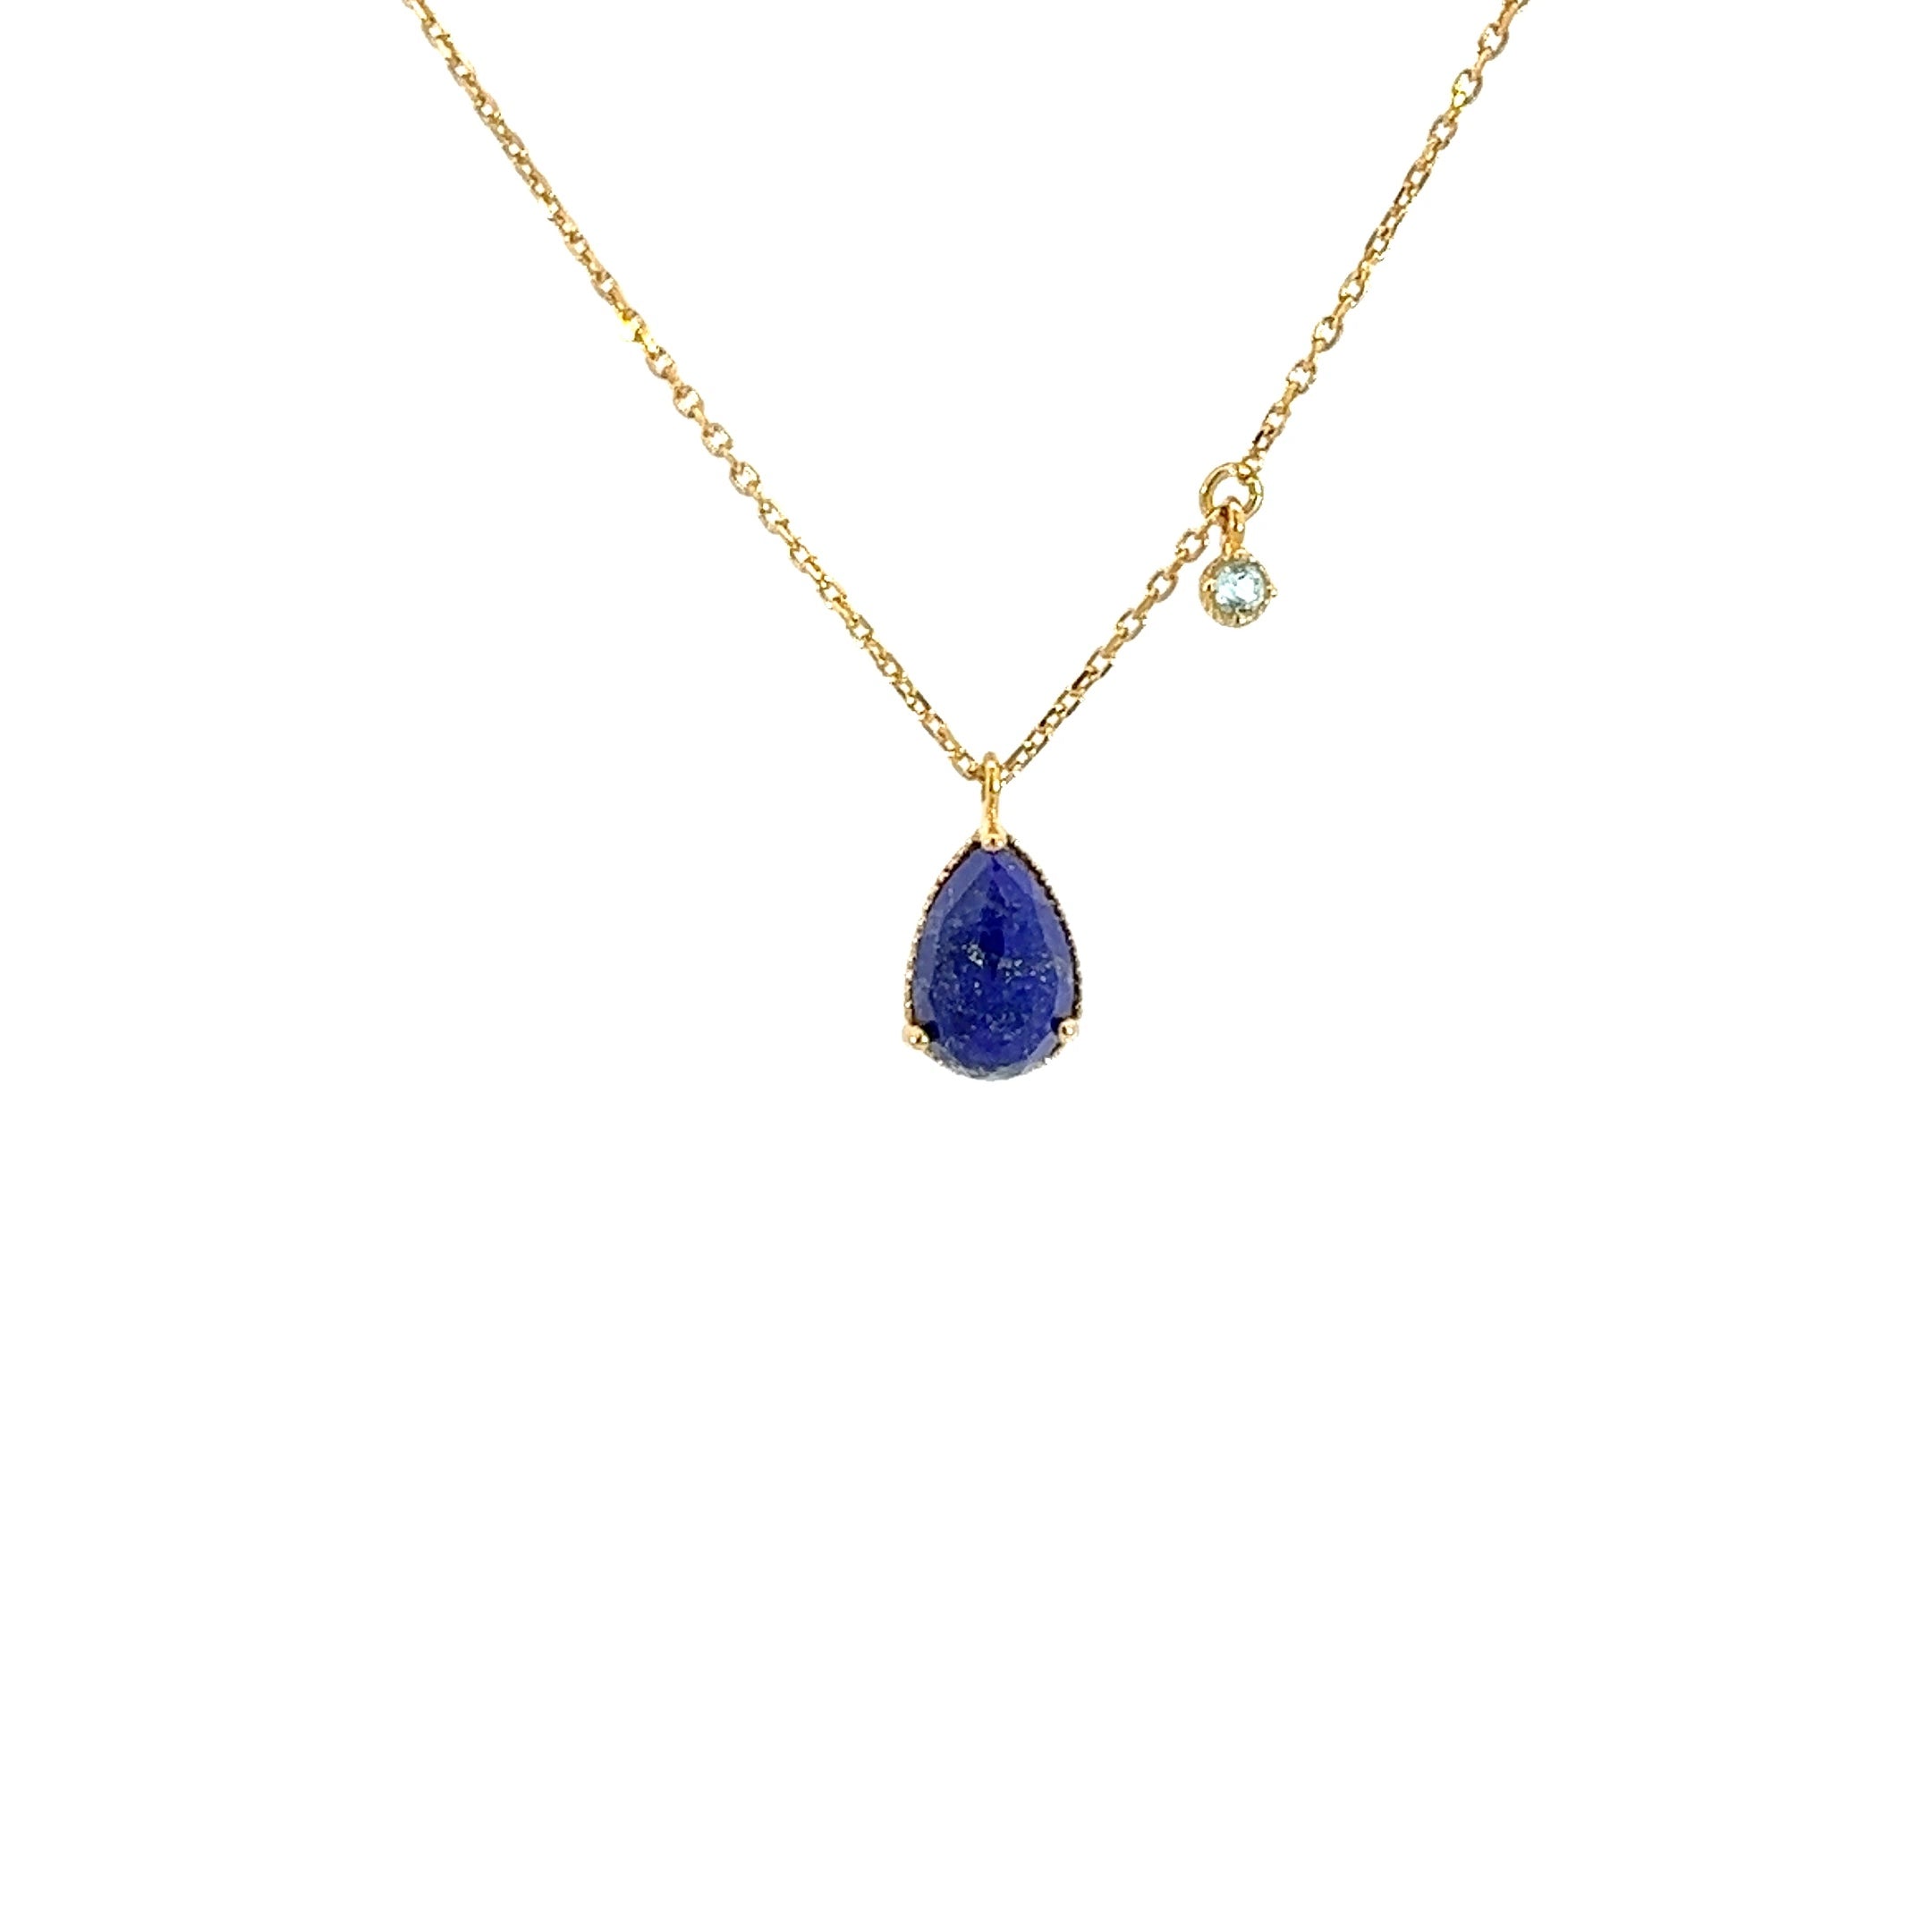 LAPIS LAZULI DROP NECKLACE WITH BLUE TOPAZ SET IN 925 SILVER GOLD PLATED